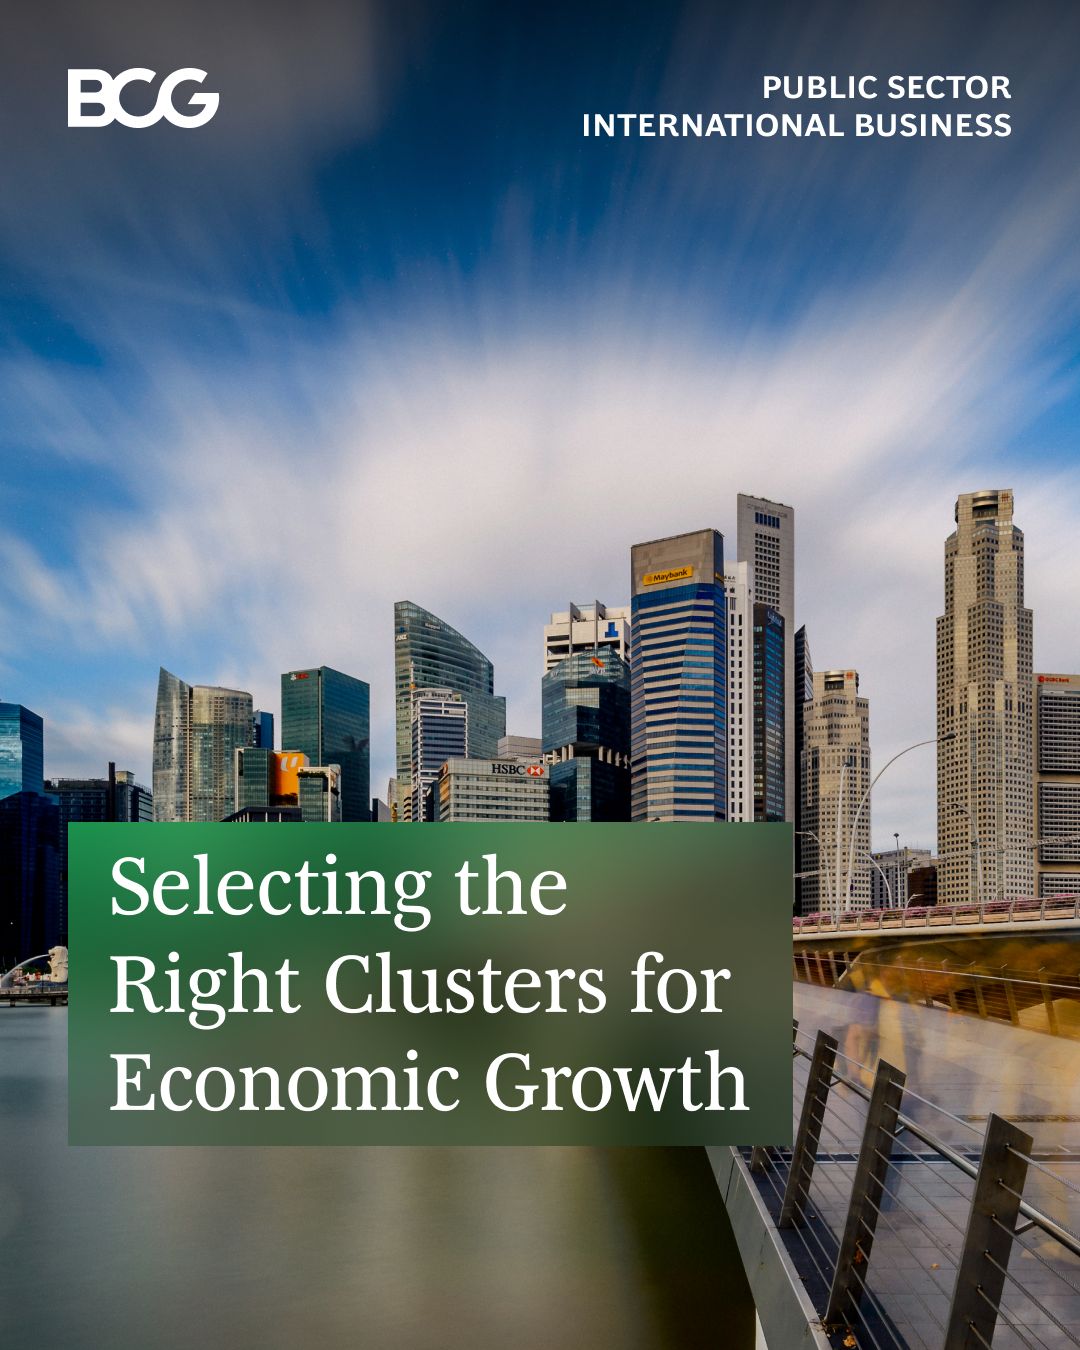 Brian Fulk, MBA on LinkedIn: Selecting the Right Clusters for Economic ...